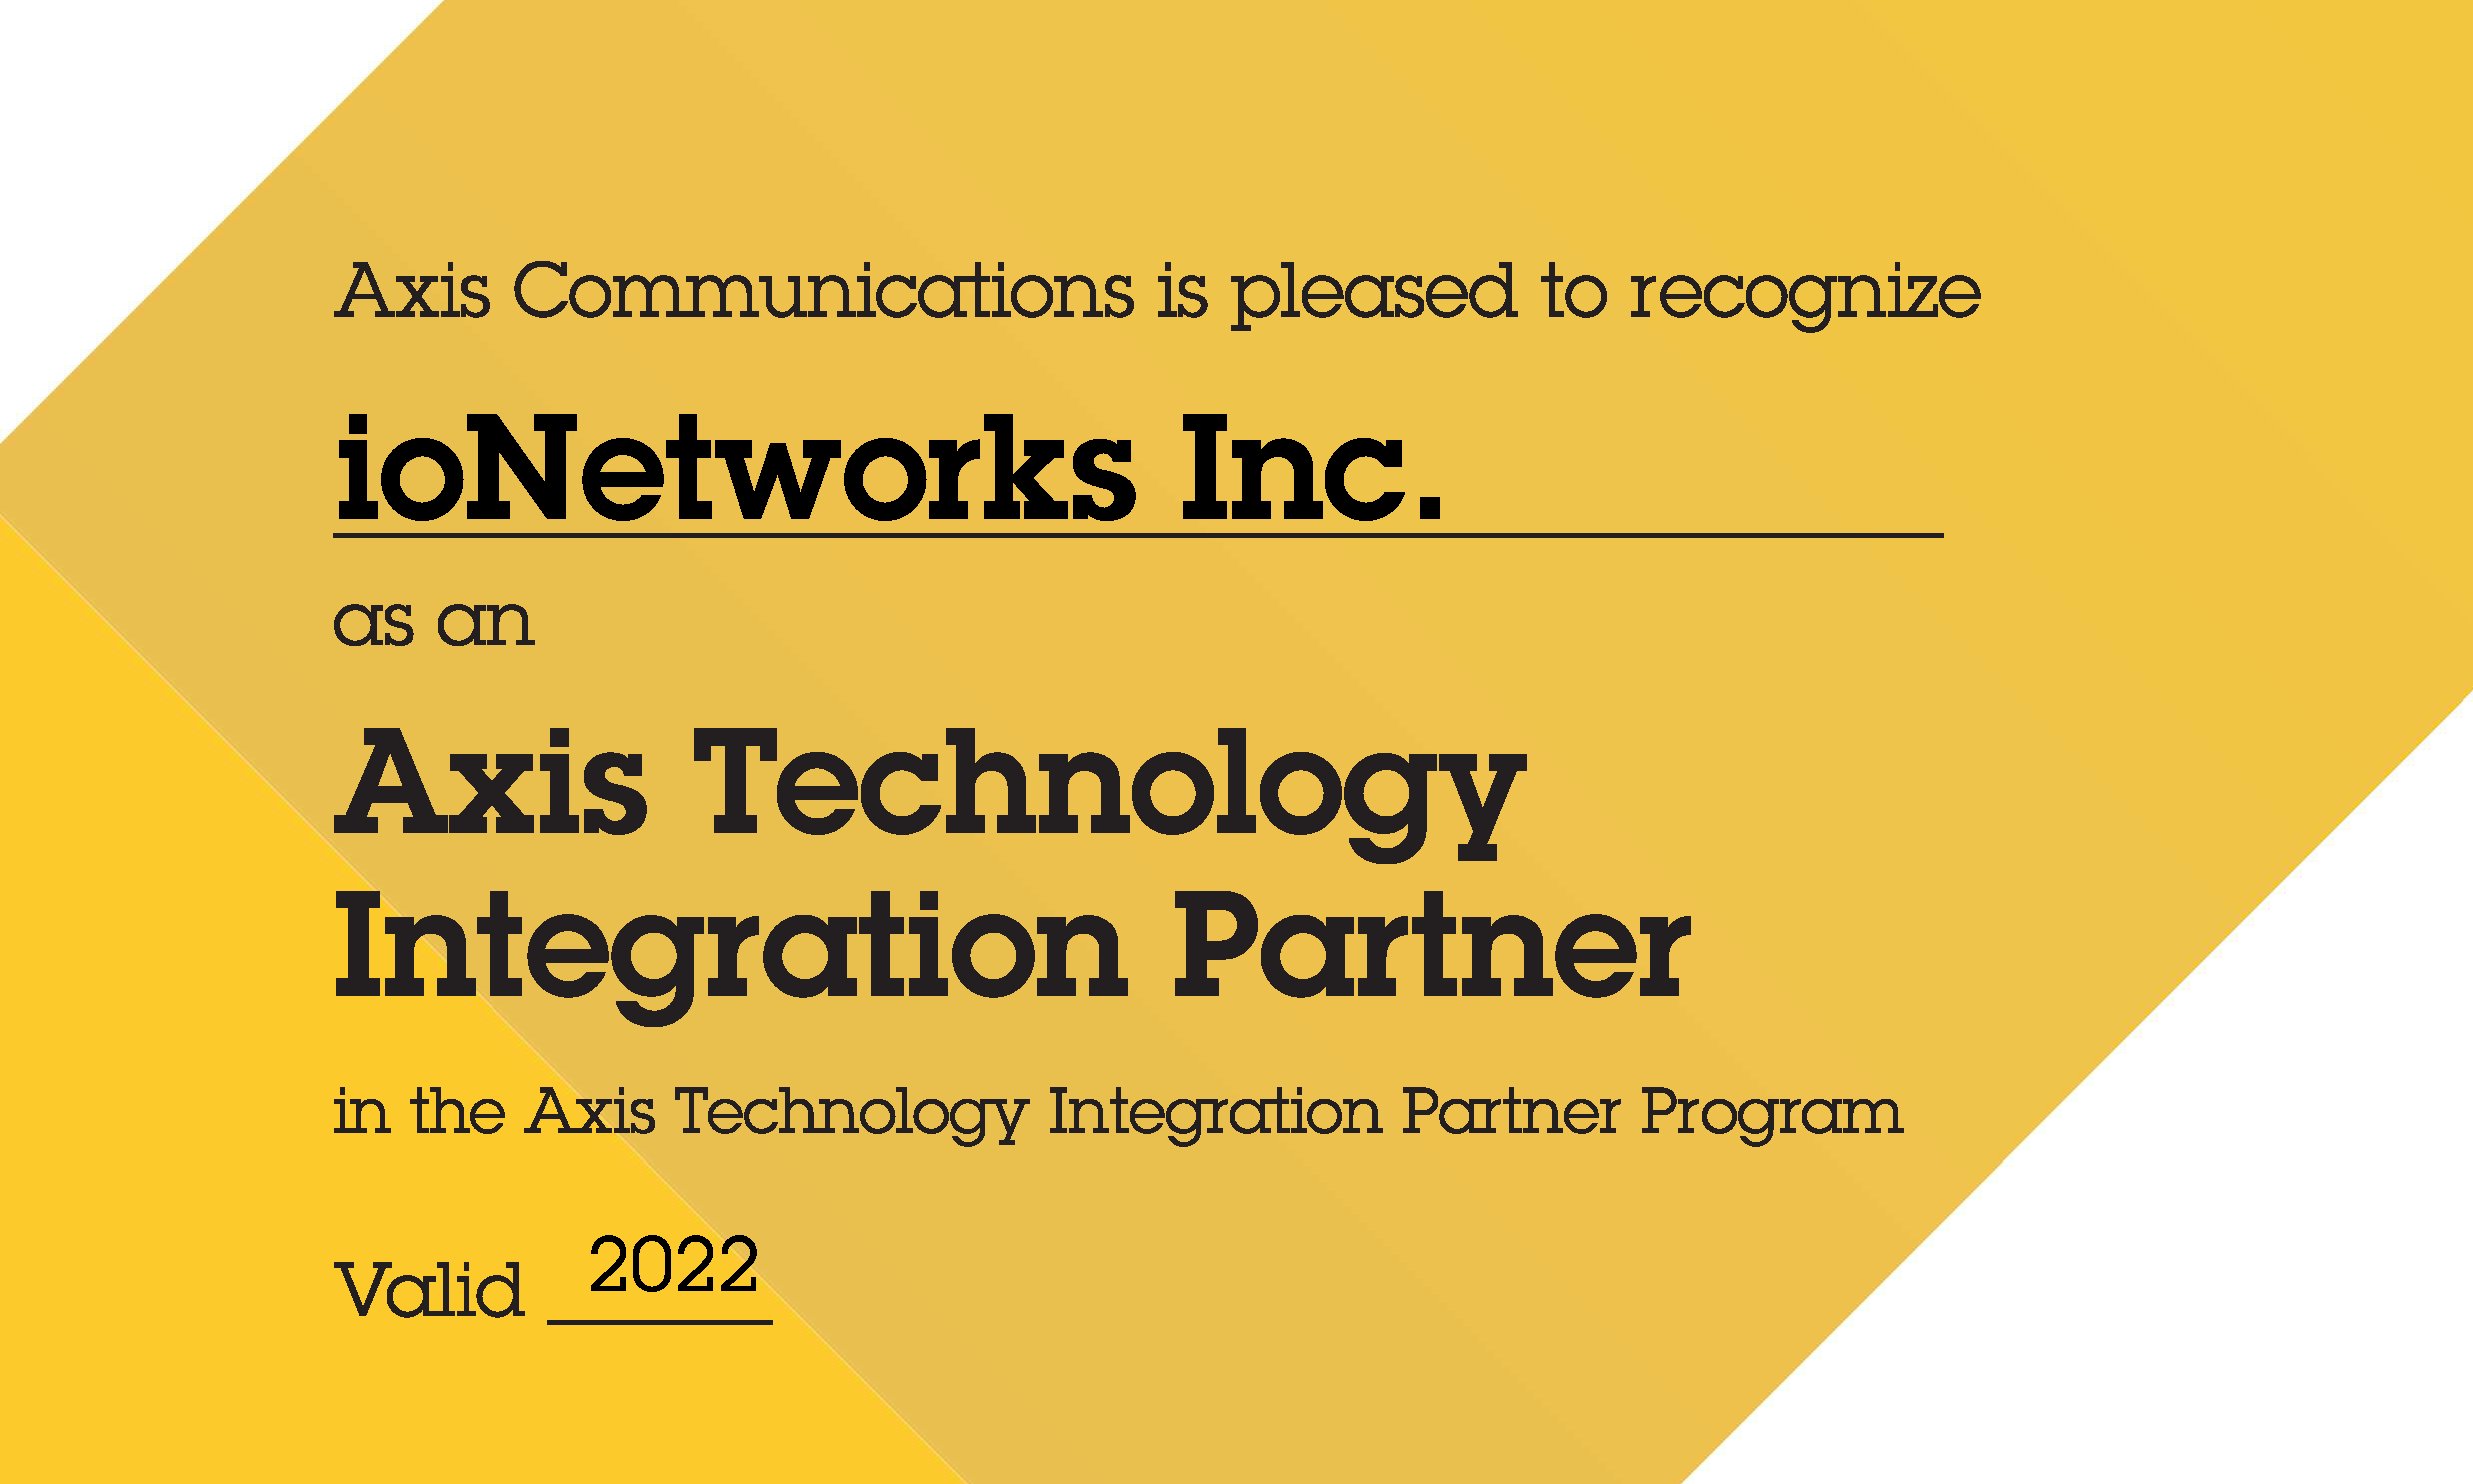 Leading Innovative Imaging AI Solution Provider ioNetworks Announces Technology Integration Partner with Axis Communications